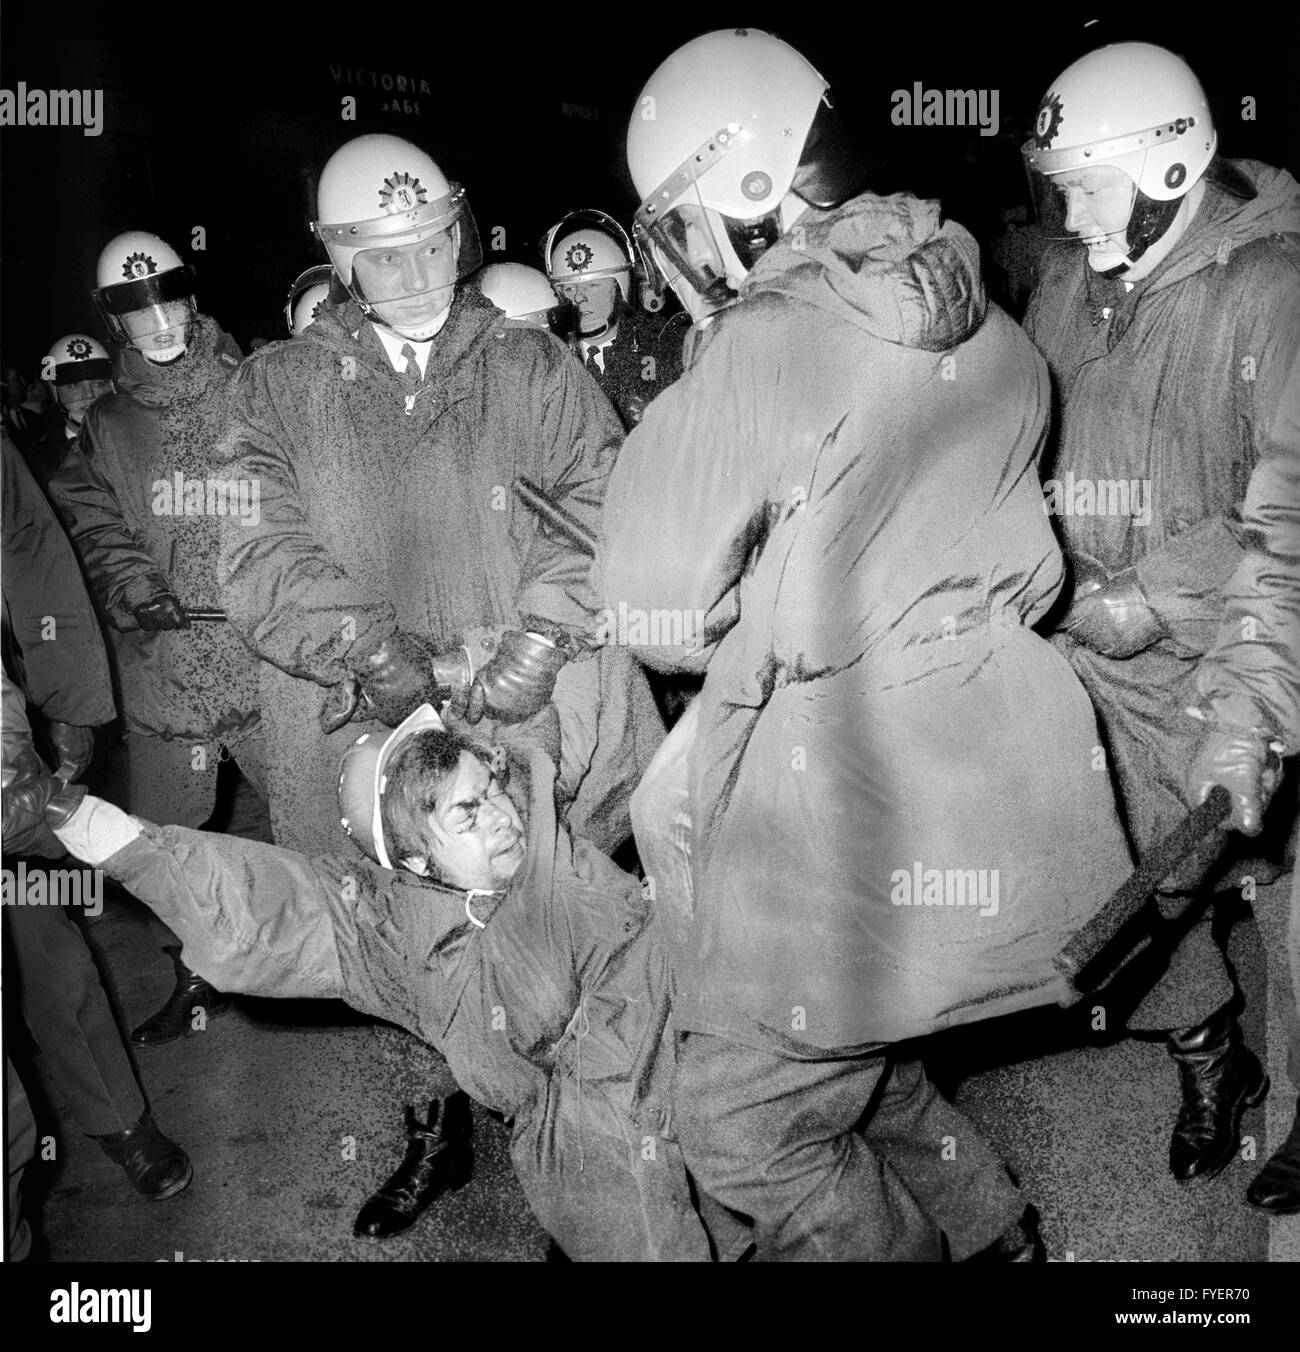 Policemen carry away a demonstrator during a demonstration against the NPD (National Democratic Party of Germany) on 04 March 1969 in Berlin. Stock Photo